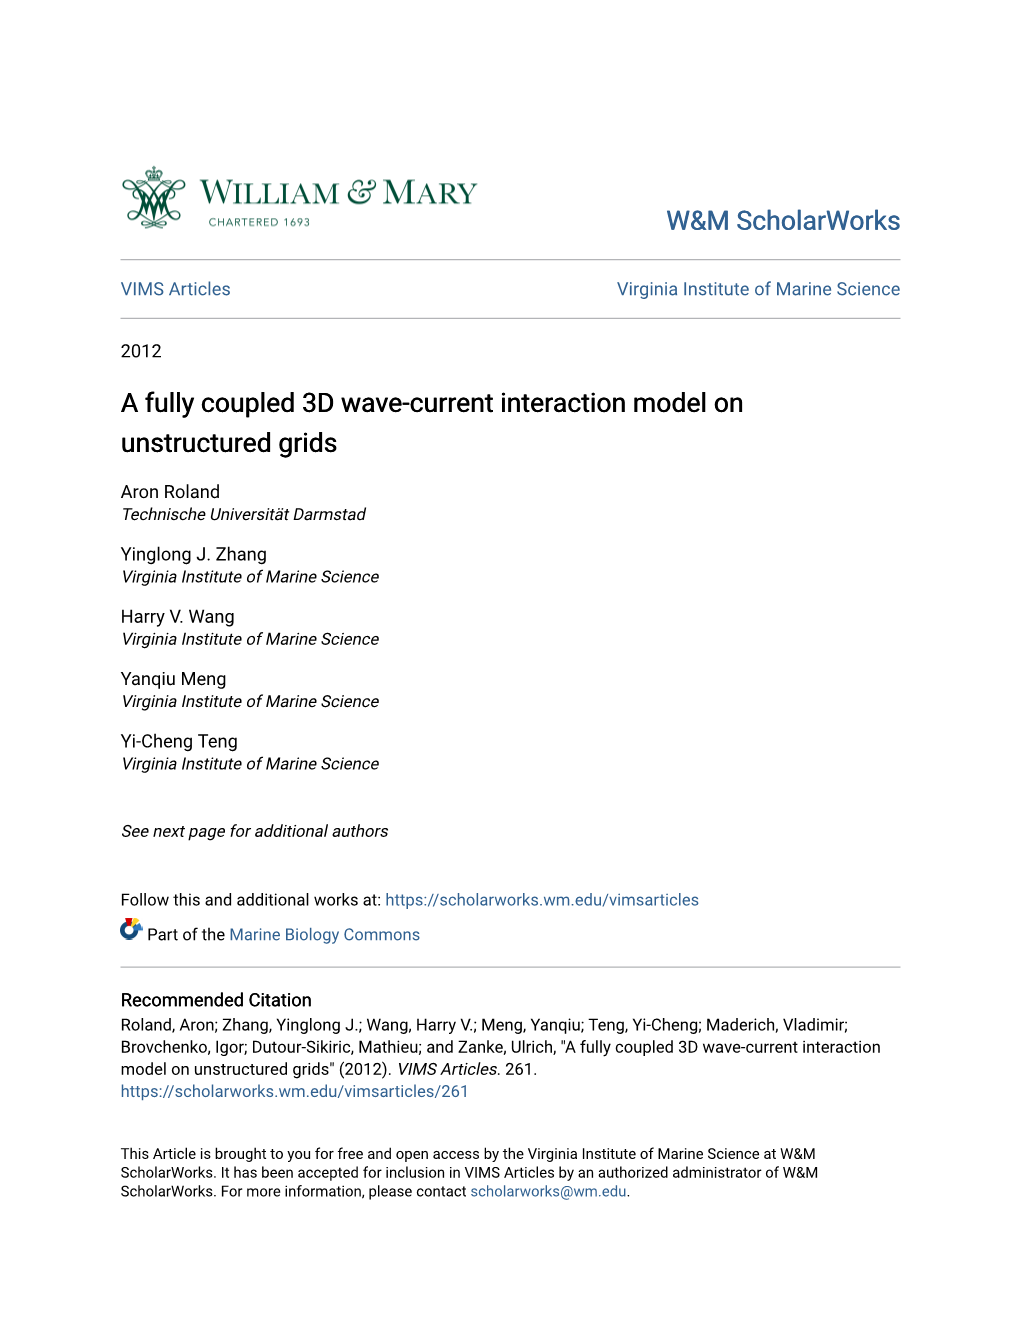 A Fully Coupled 3D Wave-Current Interaction Model on Unstructured Grids